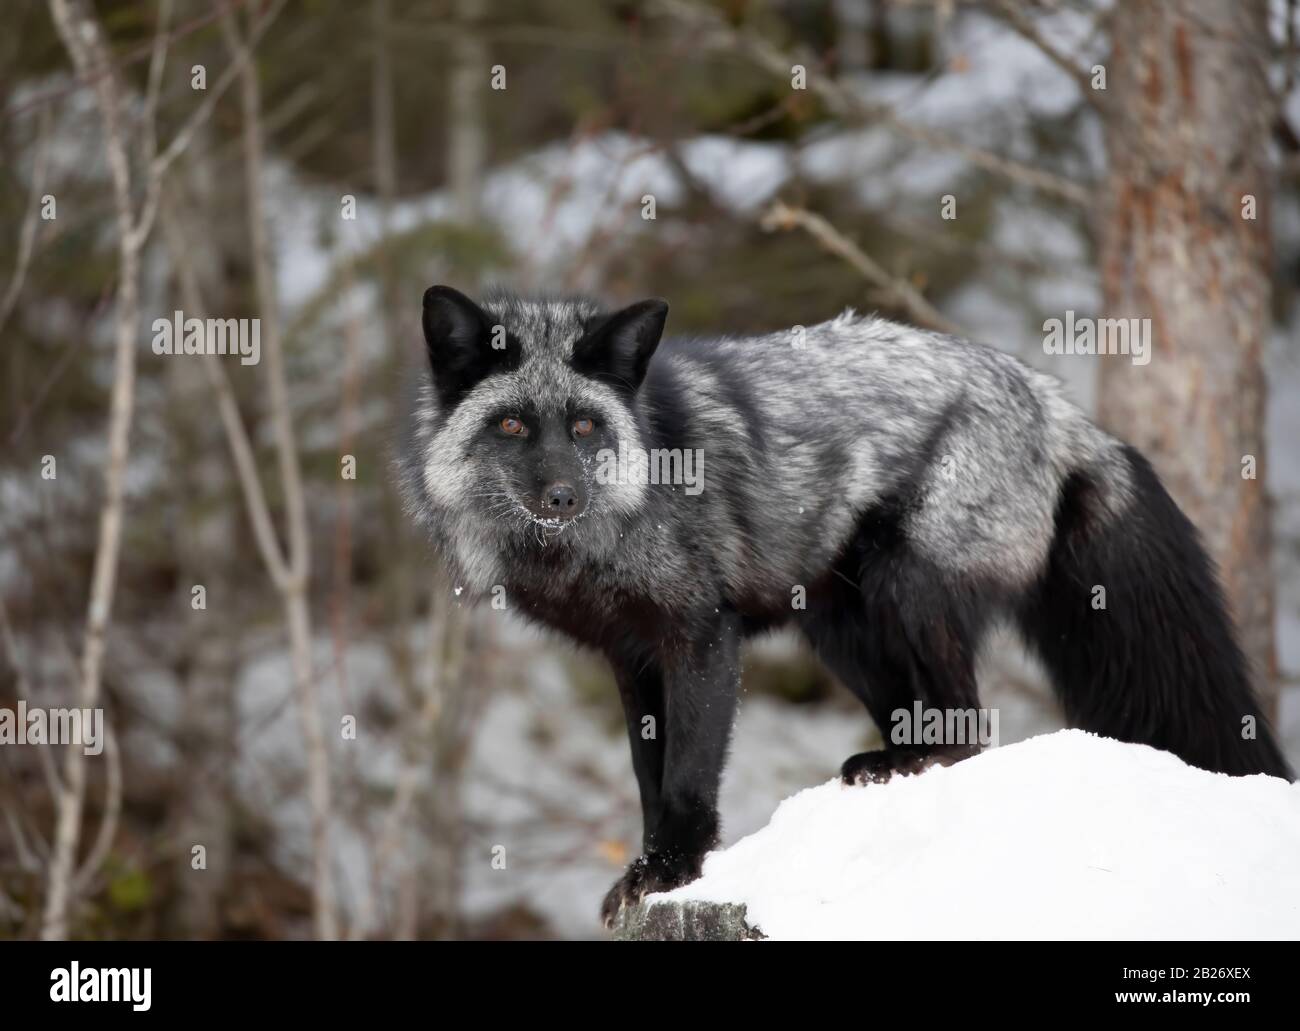 SLY SILVER FOX ENTERS VILLAGE Locals look on in amazement as this silver fox  makes an unannounced visit - the first in this Stock Photo - Alamy